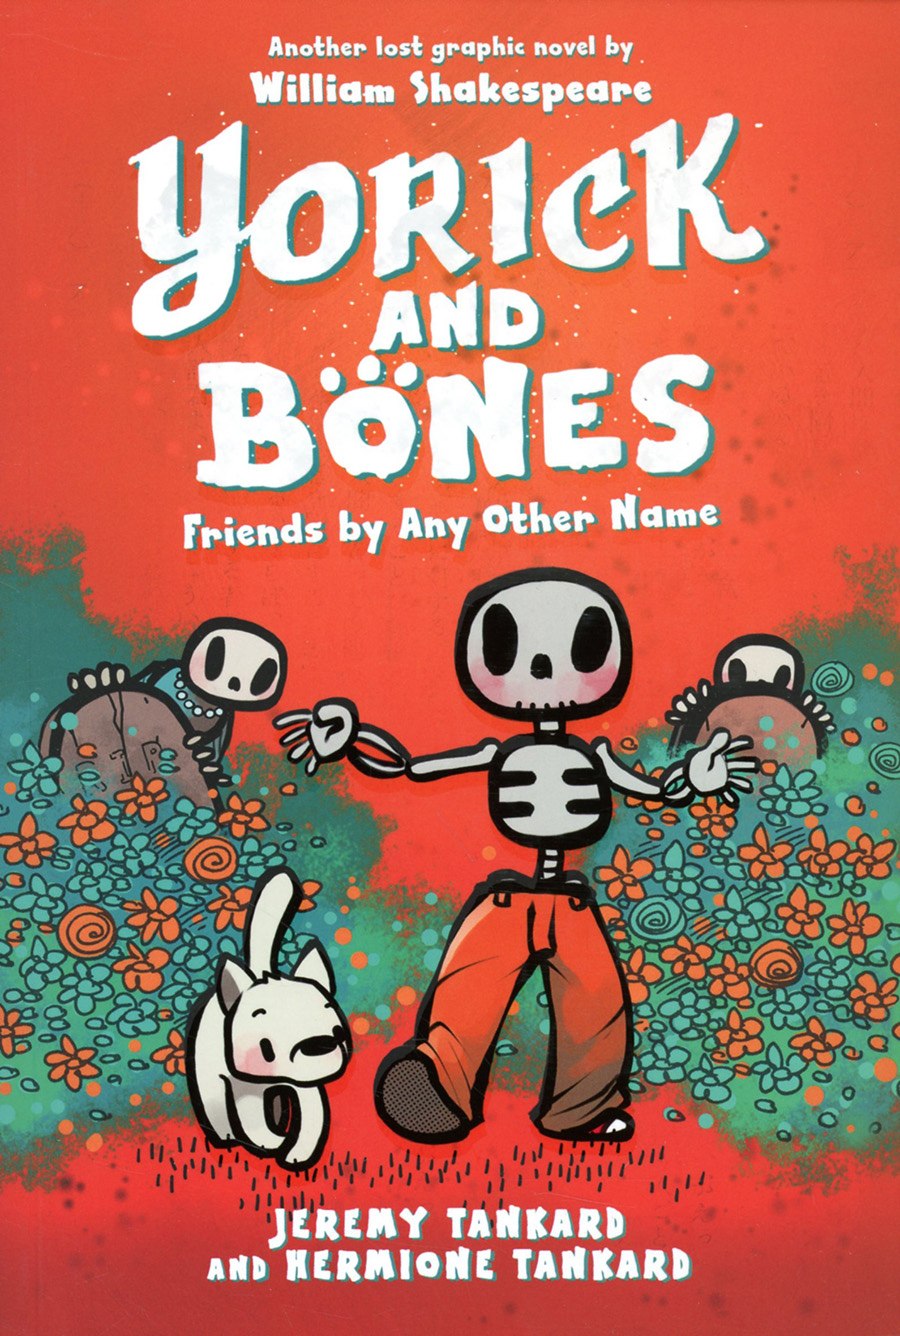 Yorick And Bones Friends By Any Other Name TP